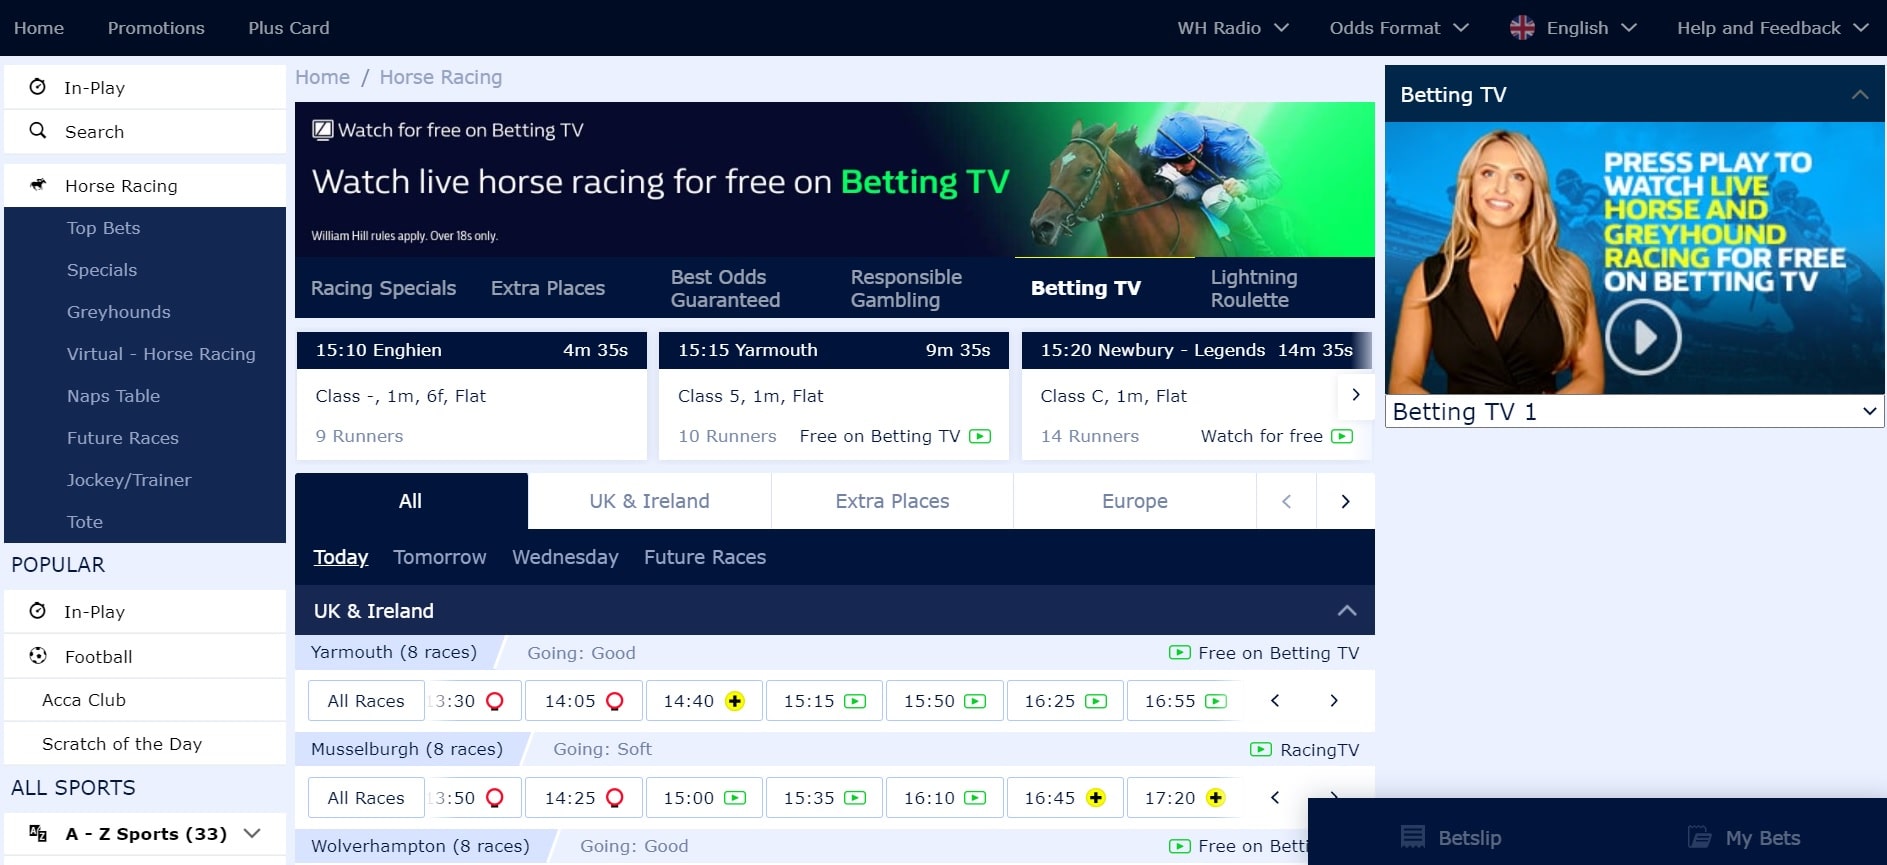 William Hill live horse racing streaming sites min